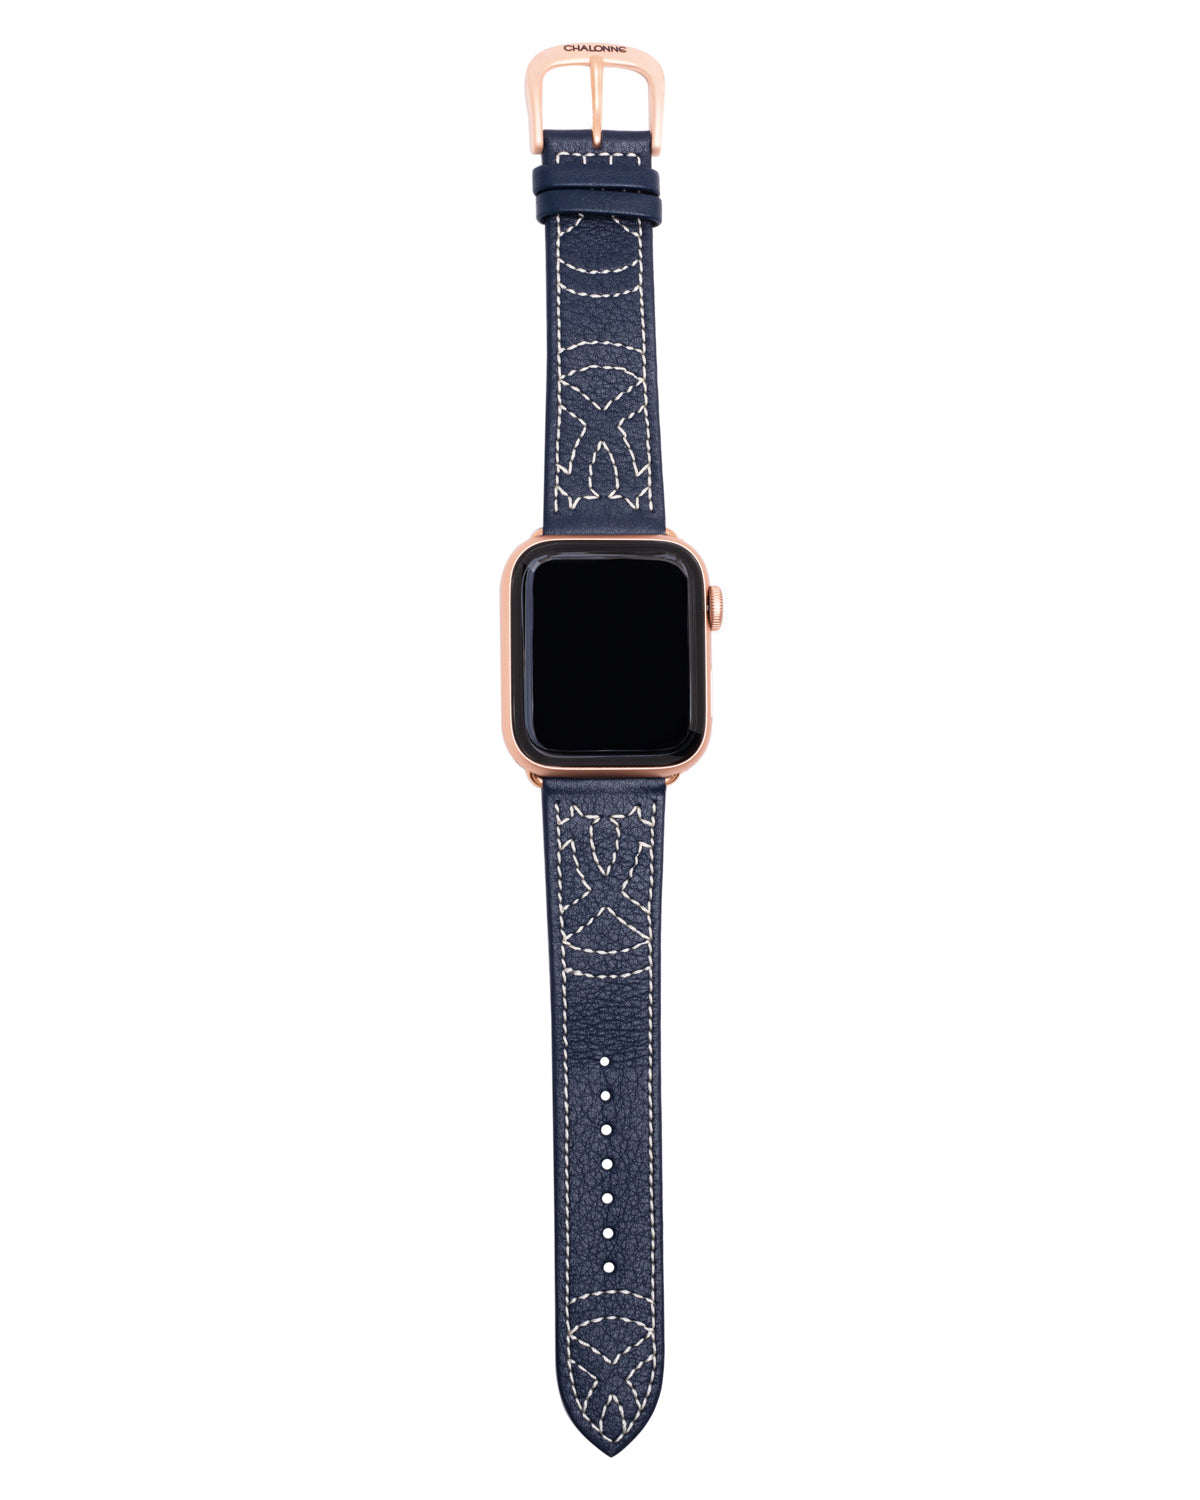 Sedona In Navy - Leather Luxury Apple Watch Band - Rose Gold, Chalonne